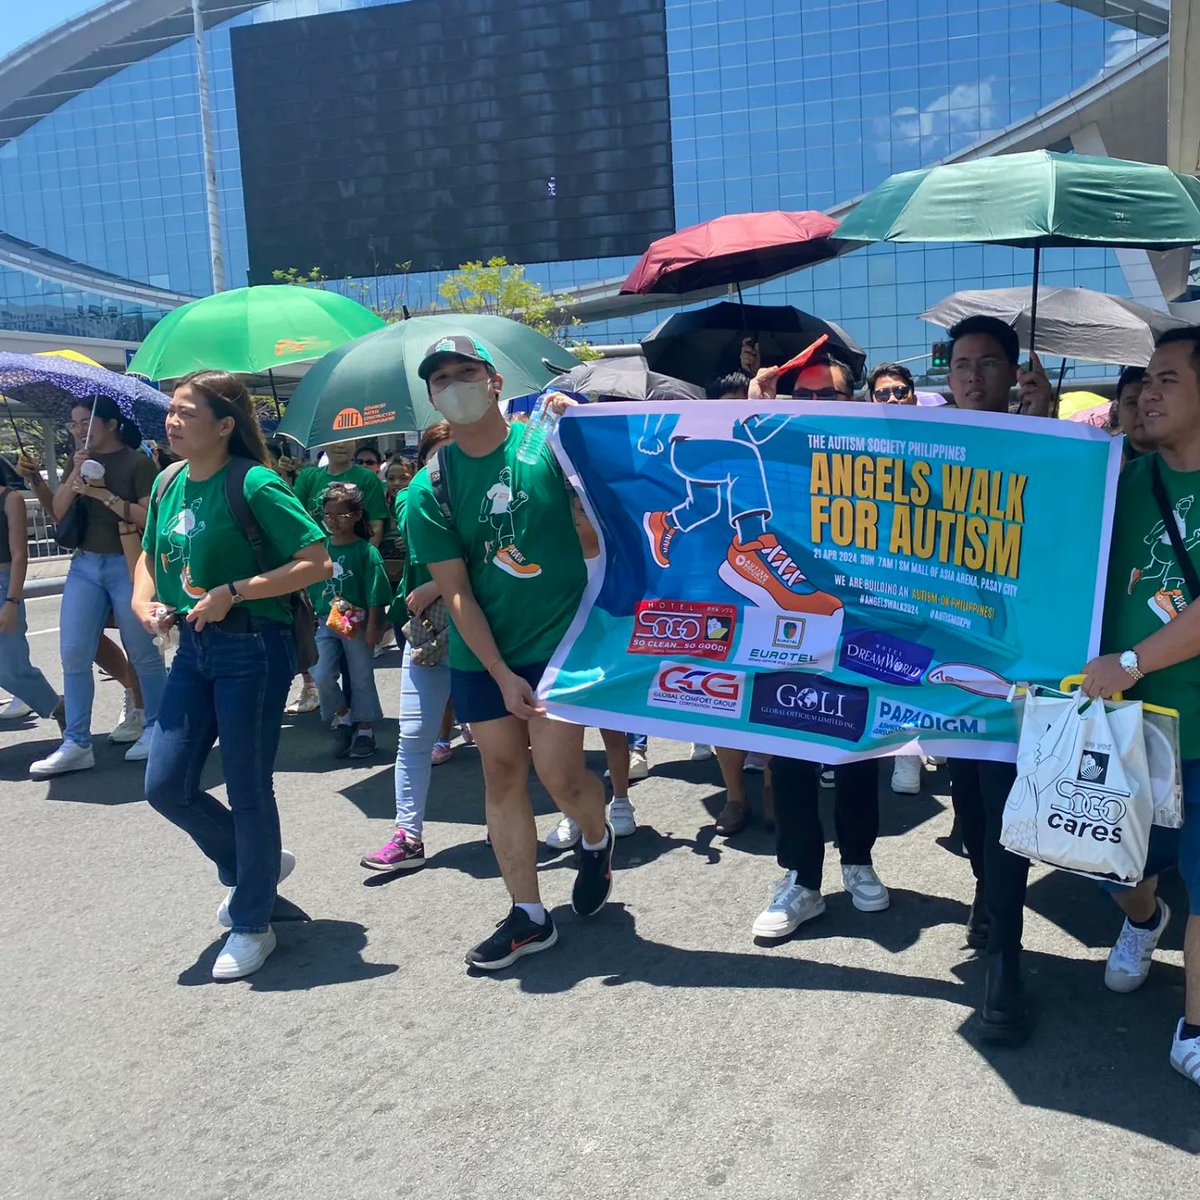 Hotel Sogo proudly supports the Angels Walk for Autism! 
Join us as we walk together for awareness and acceptance. Let's make a difference! 

#HotelSogo 
#DahilMahalKitaGustoKoSaSogoKa
#HereAtHotelSogo
#SoCleanSoGood 
#AngelsWalkforAutism